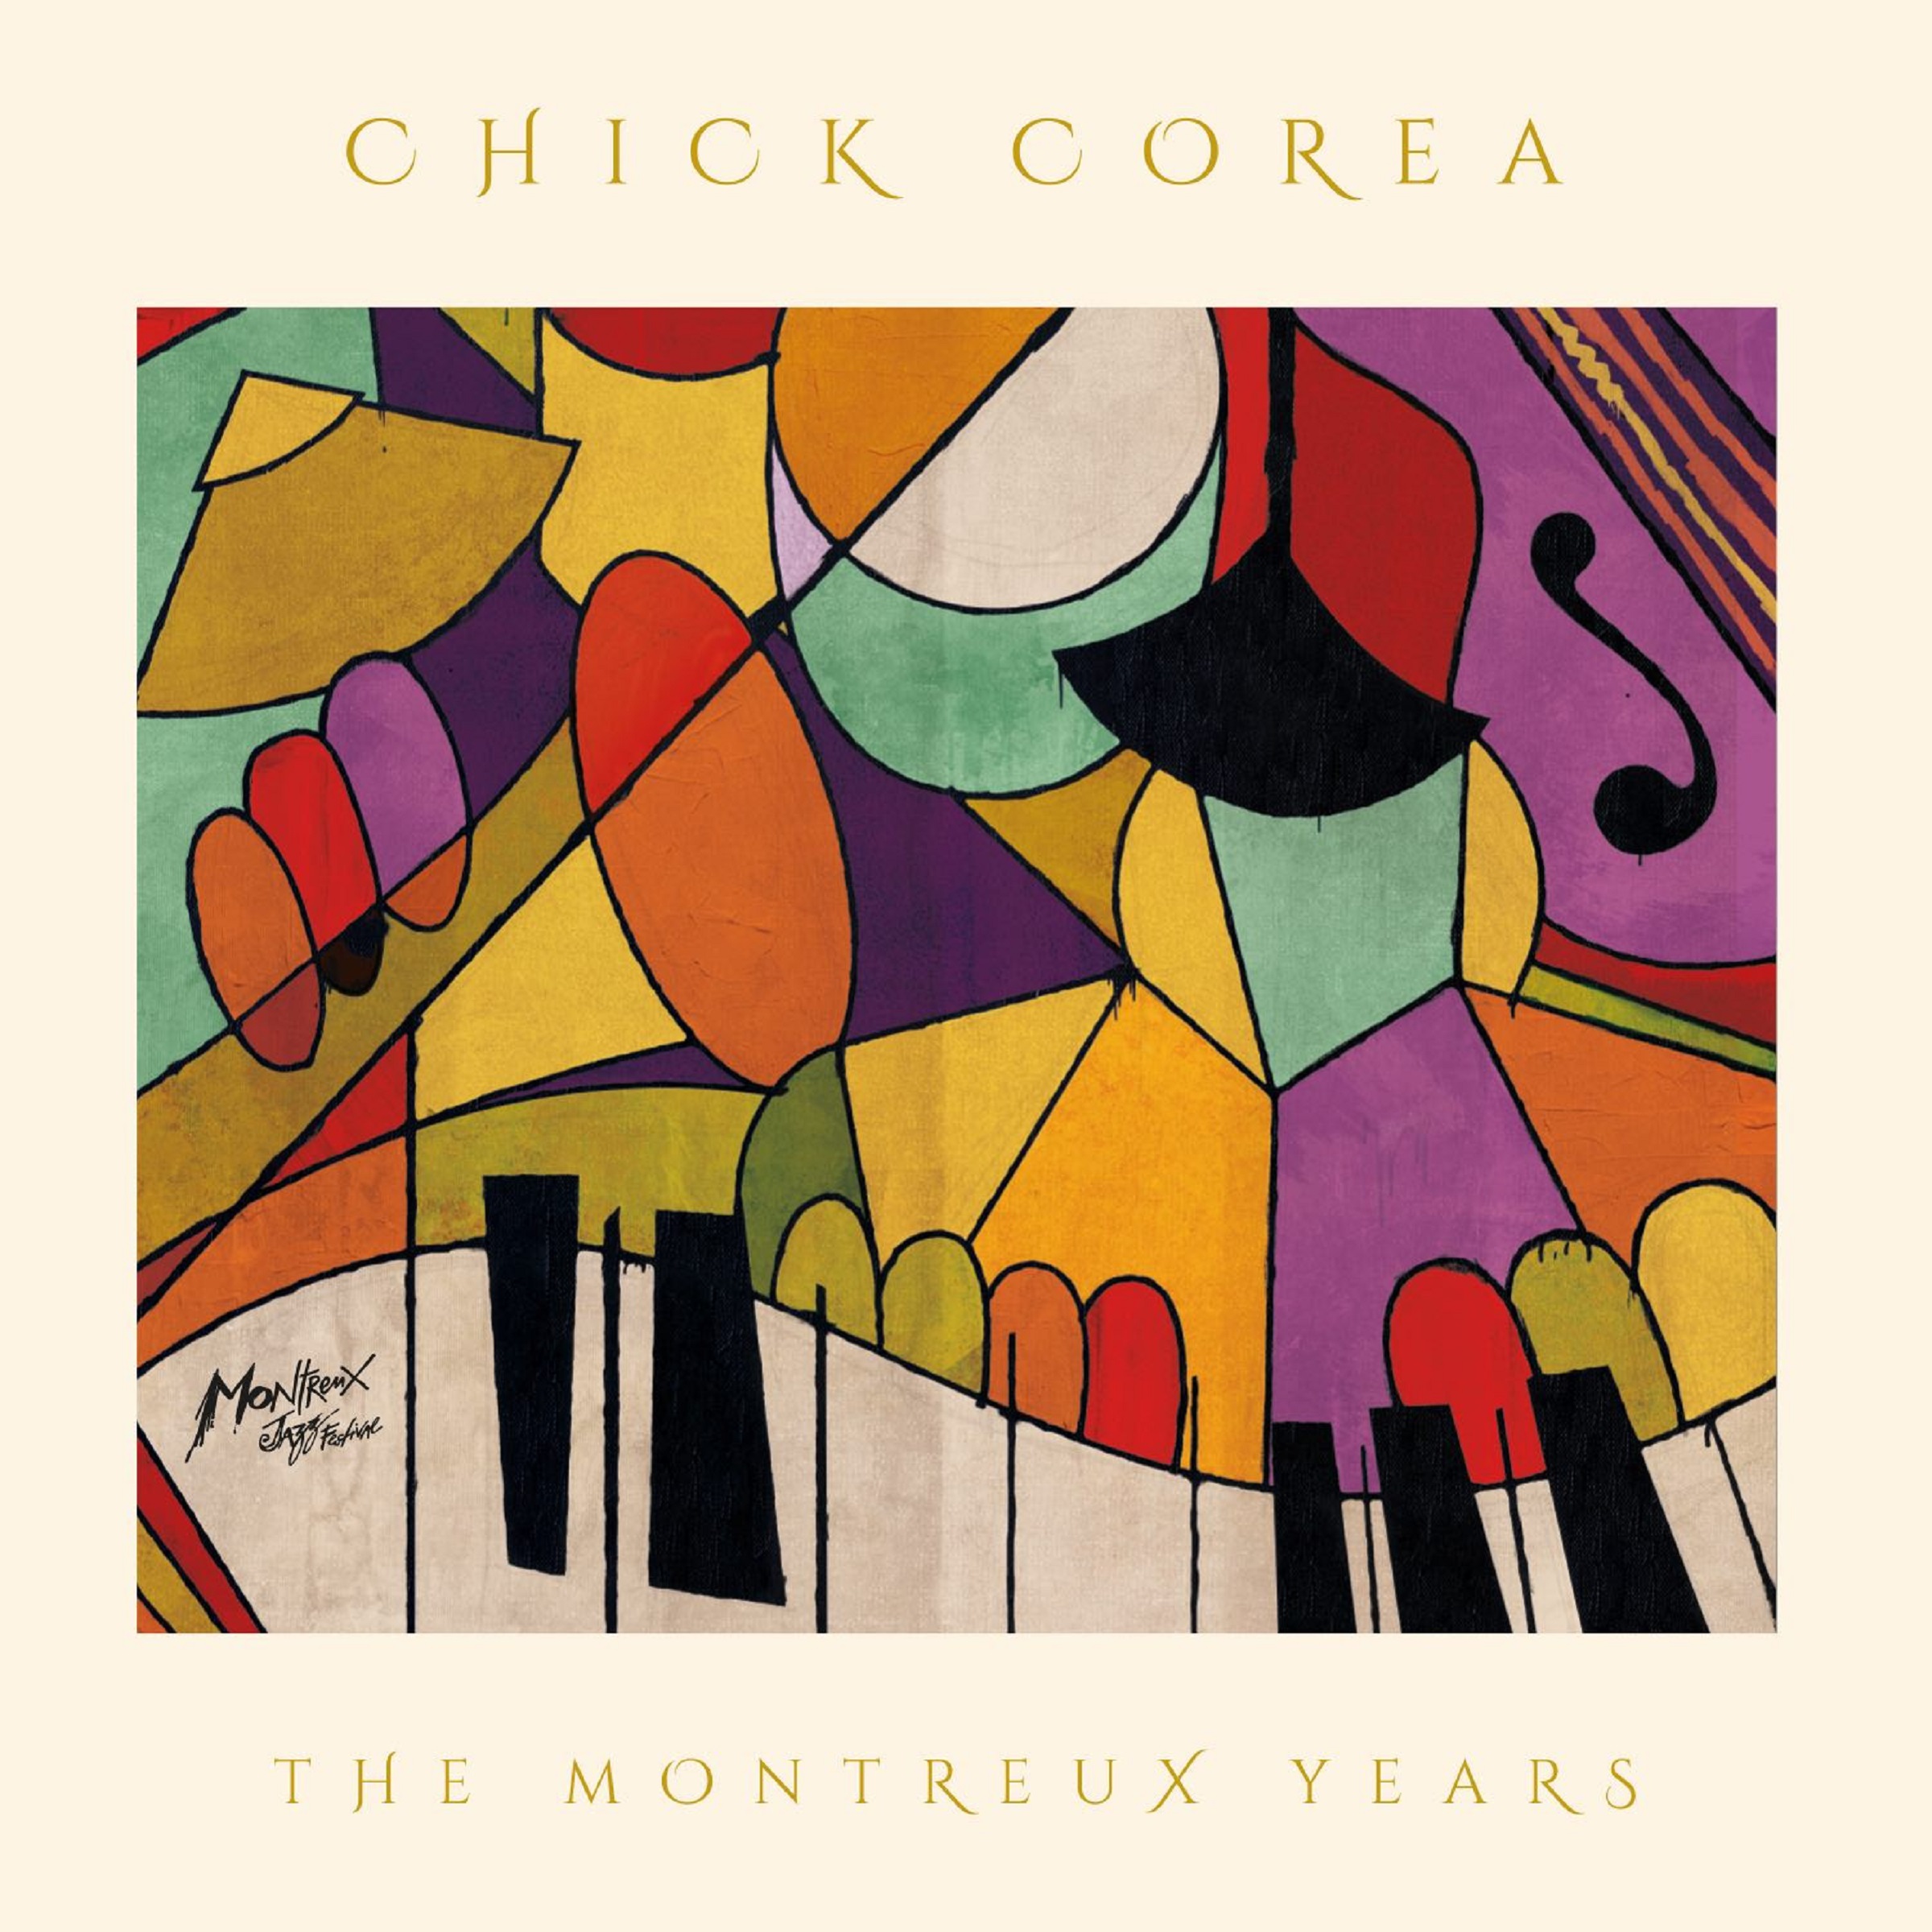 CHICK COREA: THE MONTREUX YEARS OUT NOW!